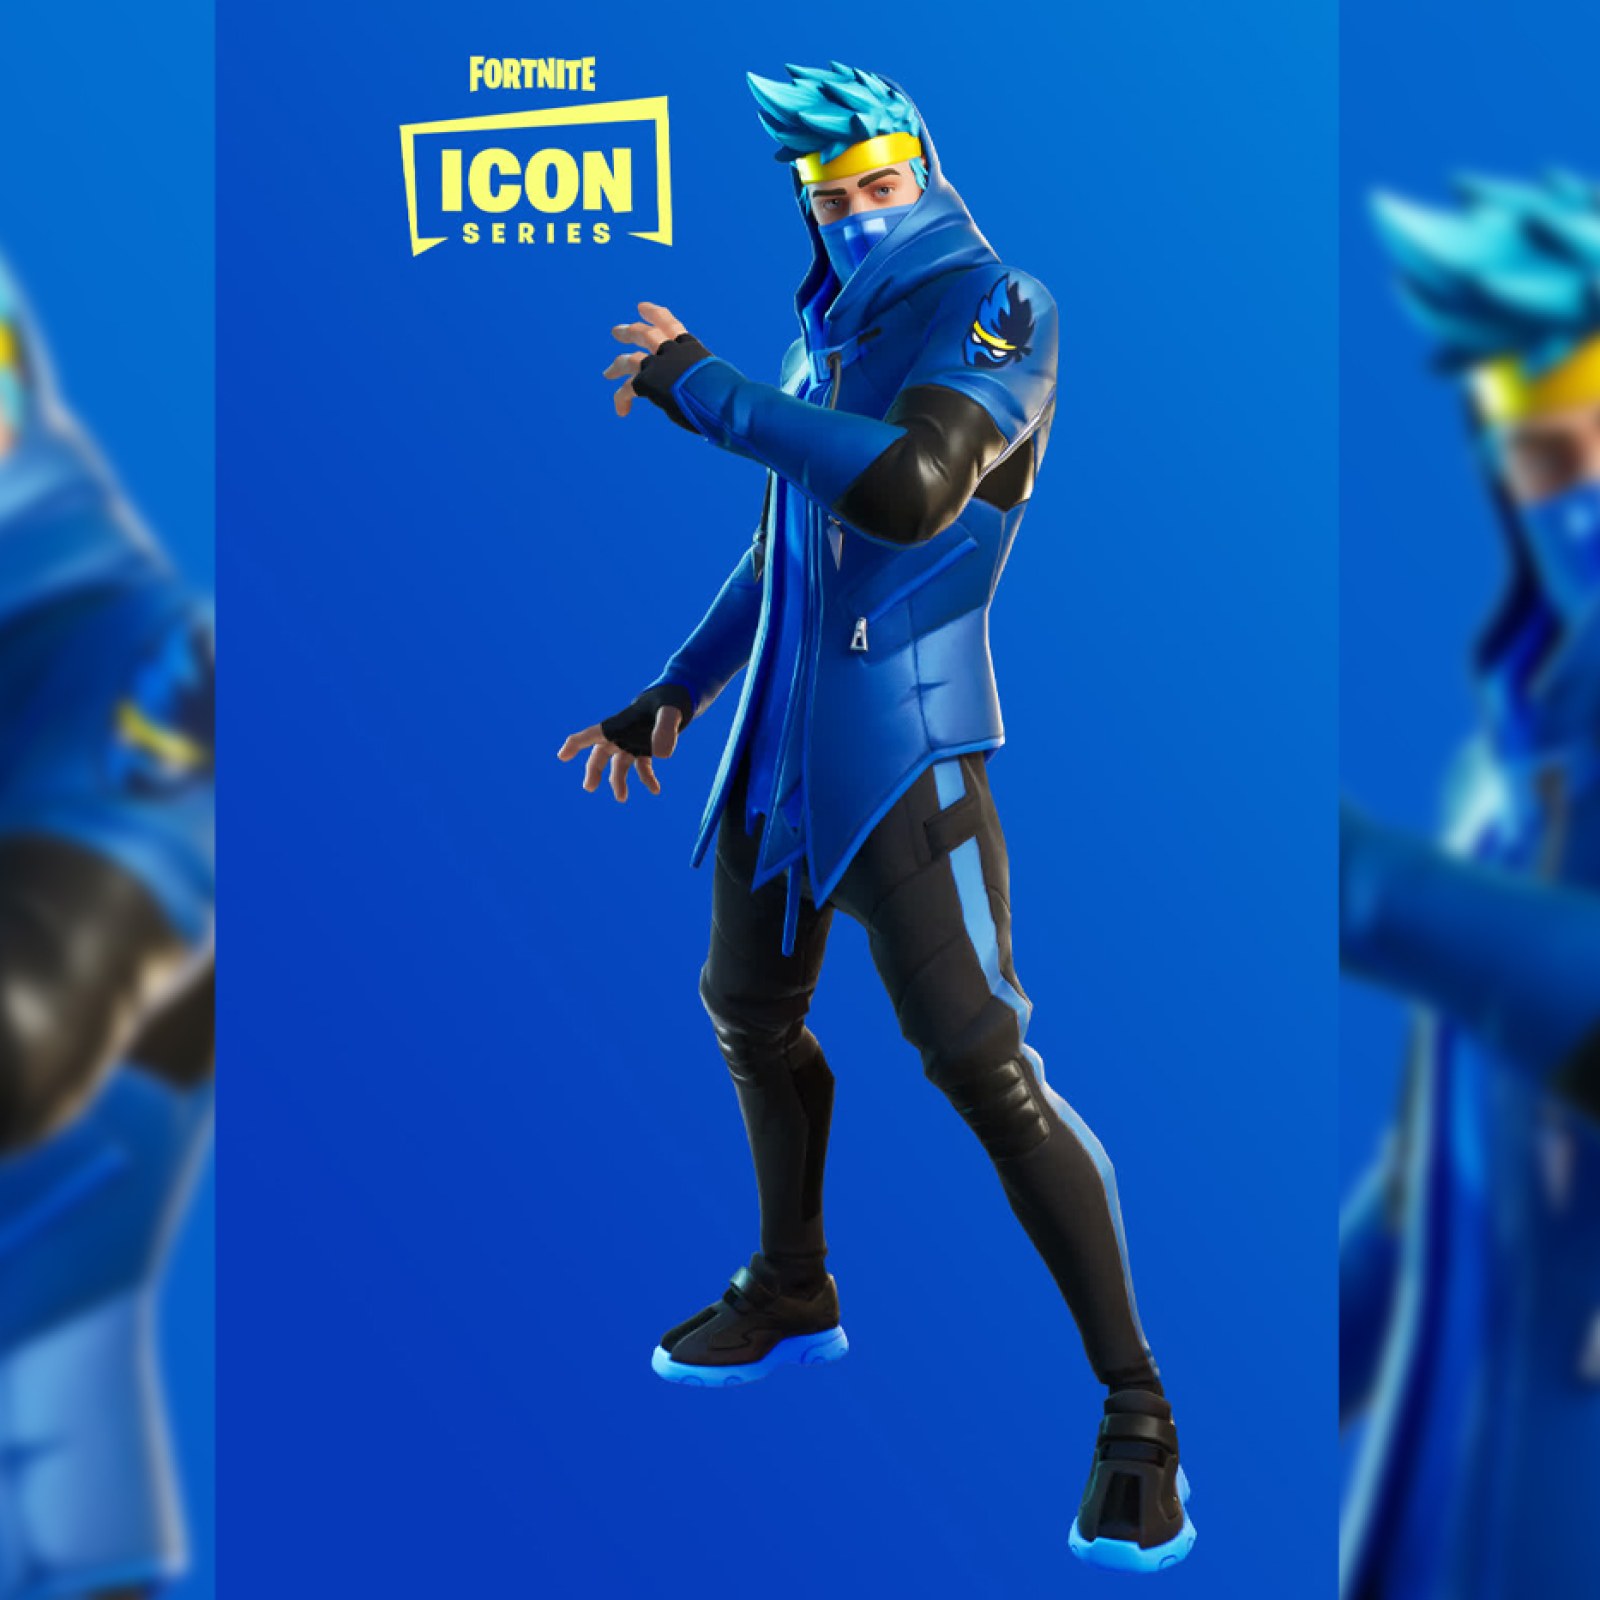 Fortnite Icon Series Ninja Fortnite Ninja Skin Revealed How To Get The Icon Series Outfit In Item Shop